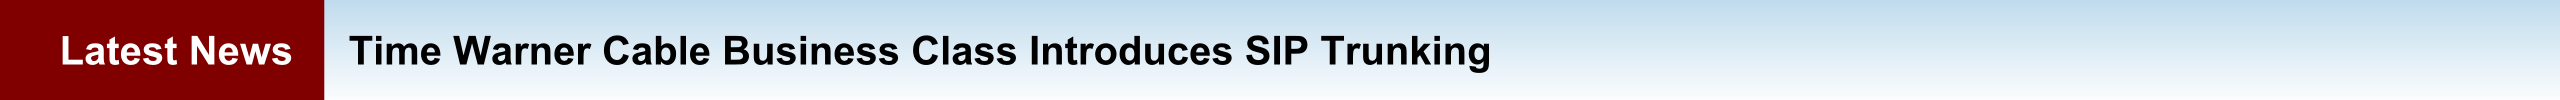 Time Warner Cable Business Class Introduces SIP Trunking